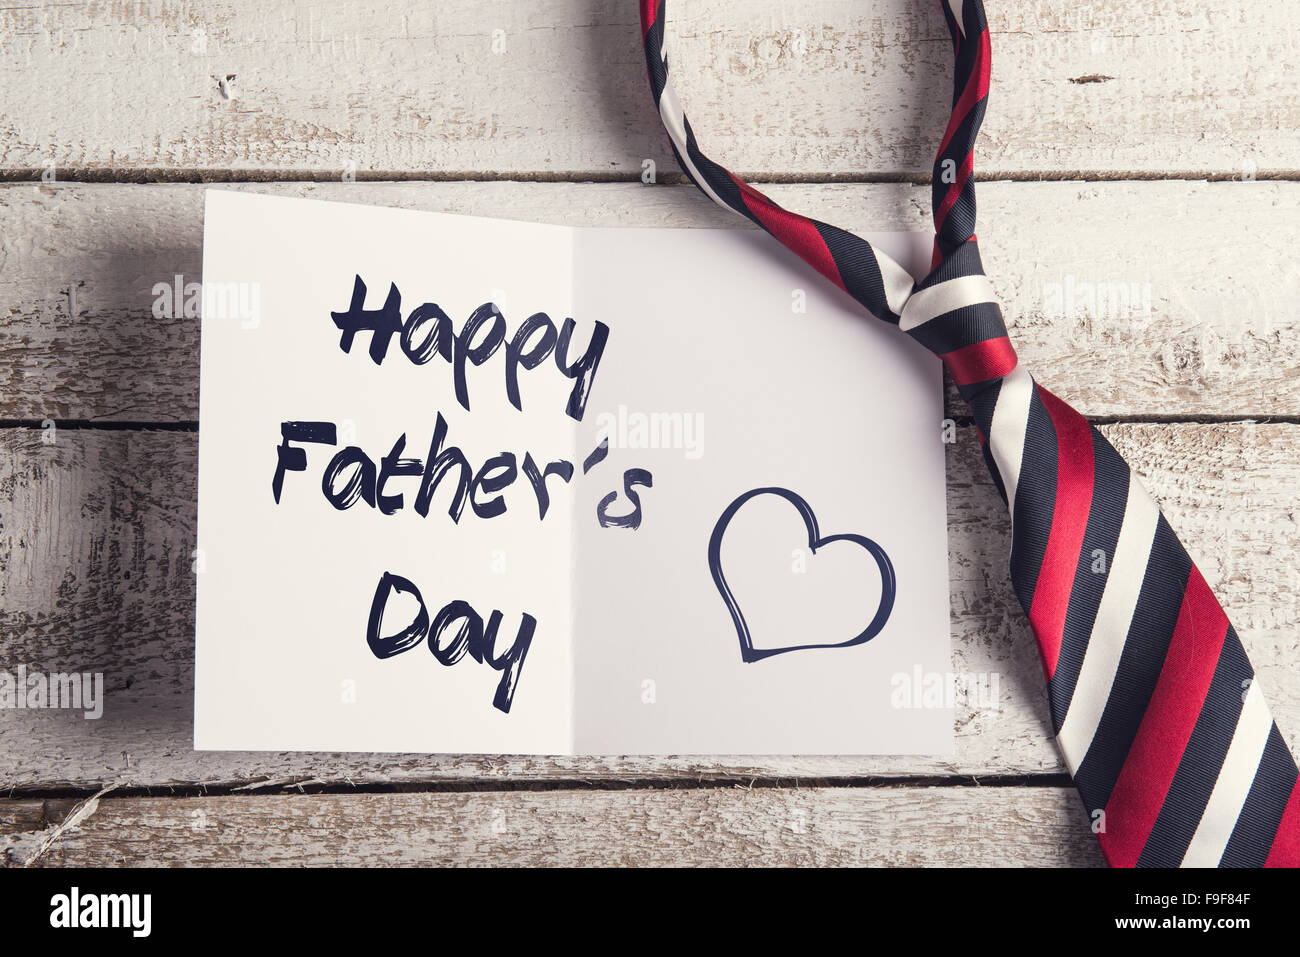 Happy fathers day sign on paper and colorful tie laid on wooden floor backround. Stock Photo